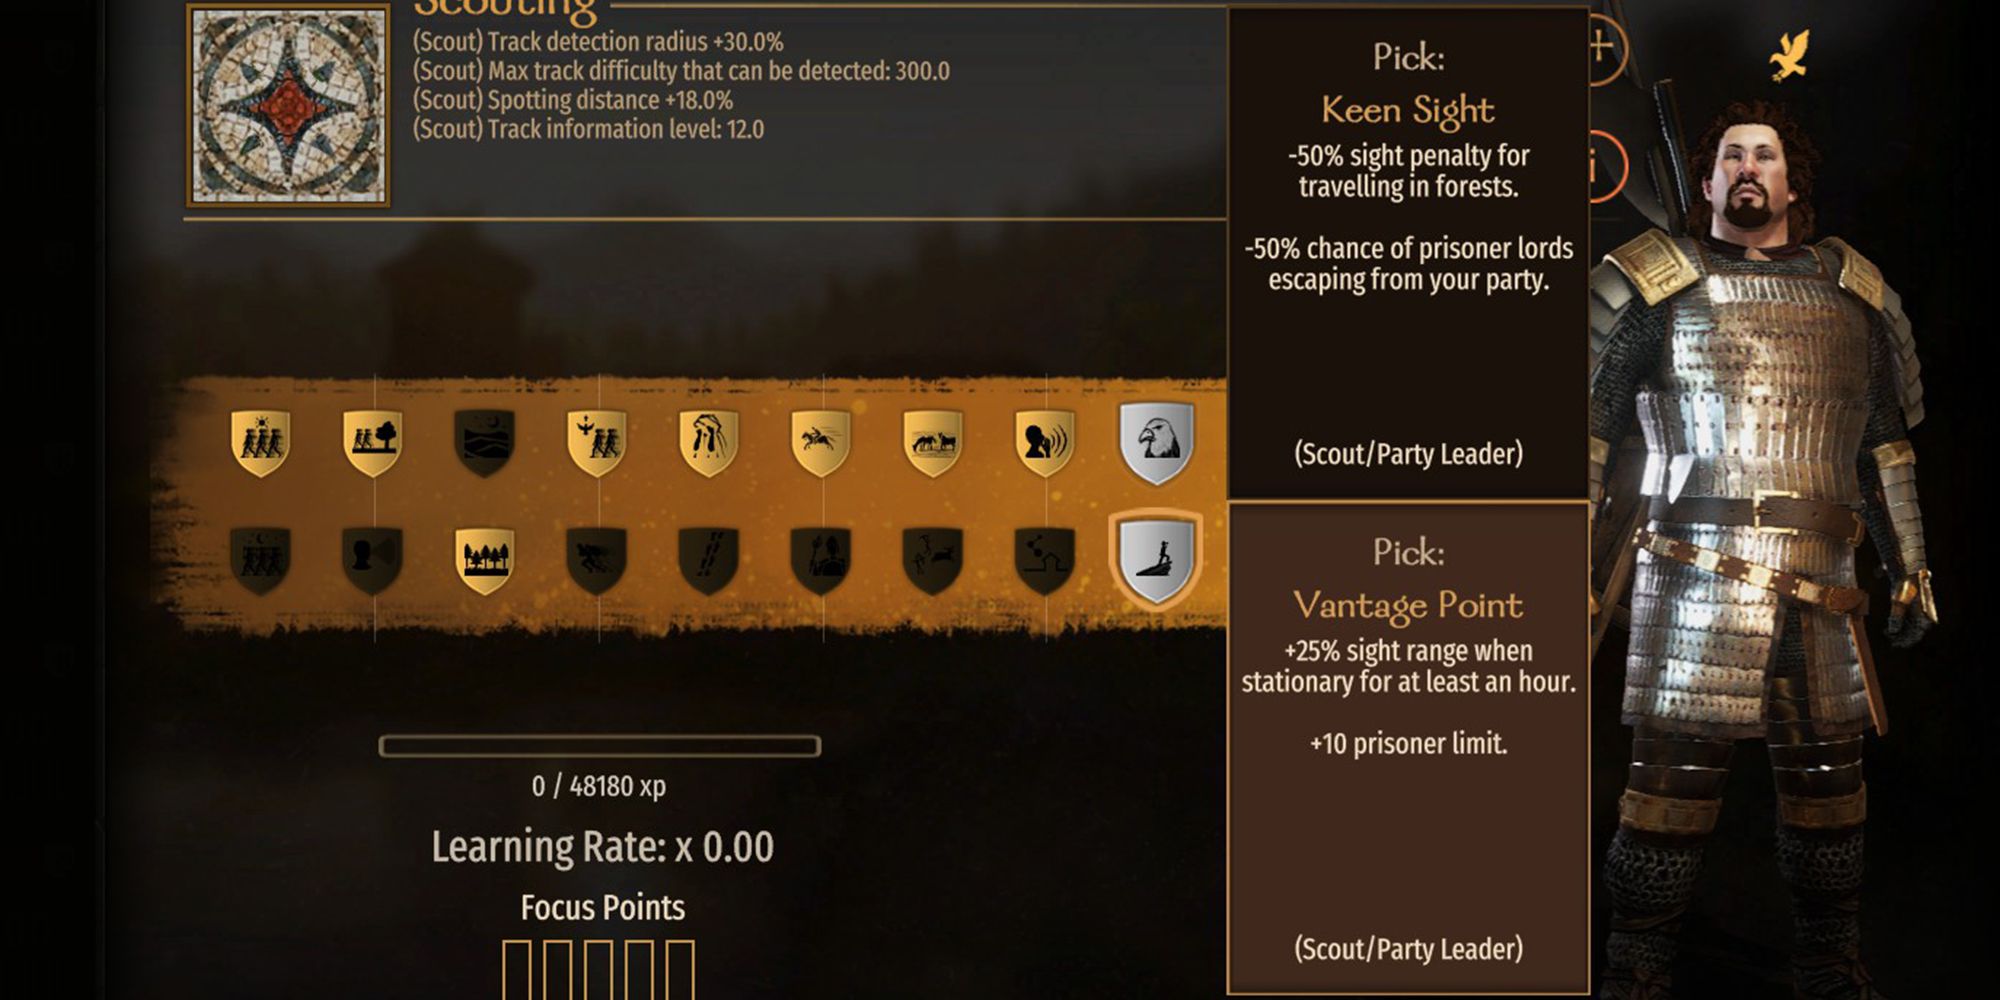 Mount & Blade 2: Bannerlord Vantage Point Perk: +25 vision range when stationary for at least 1 hour.  +10 prisoner limit.